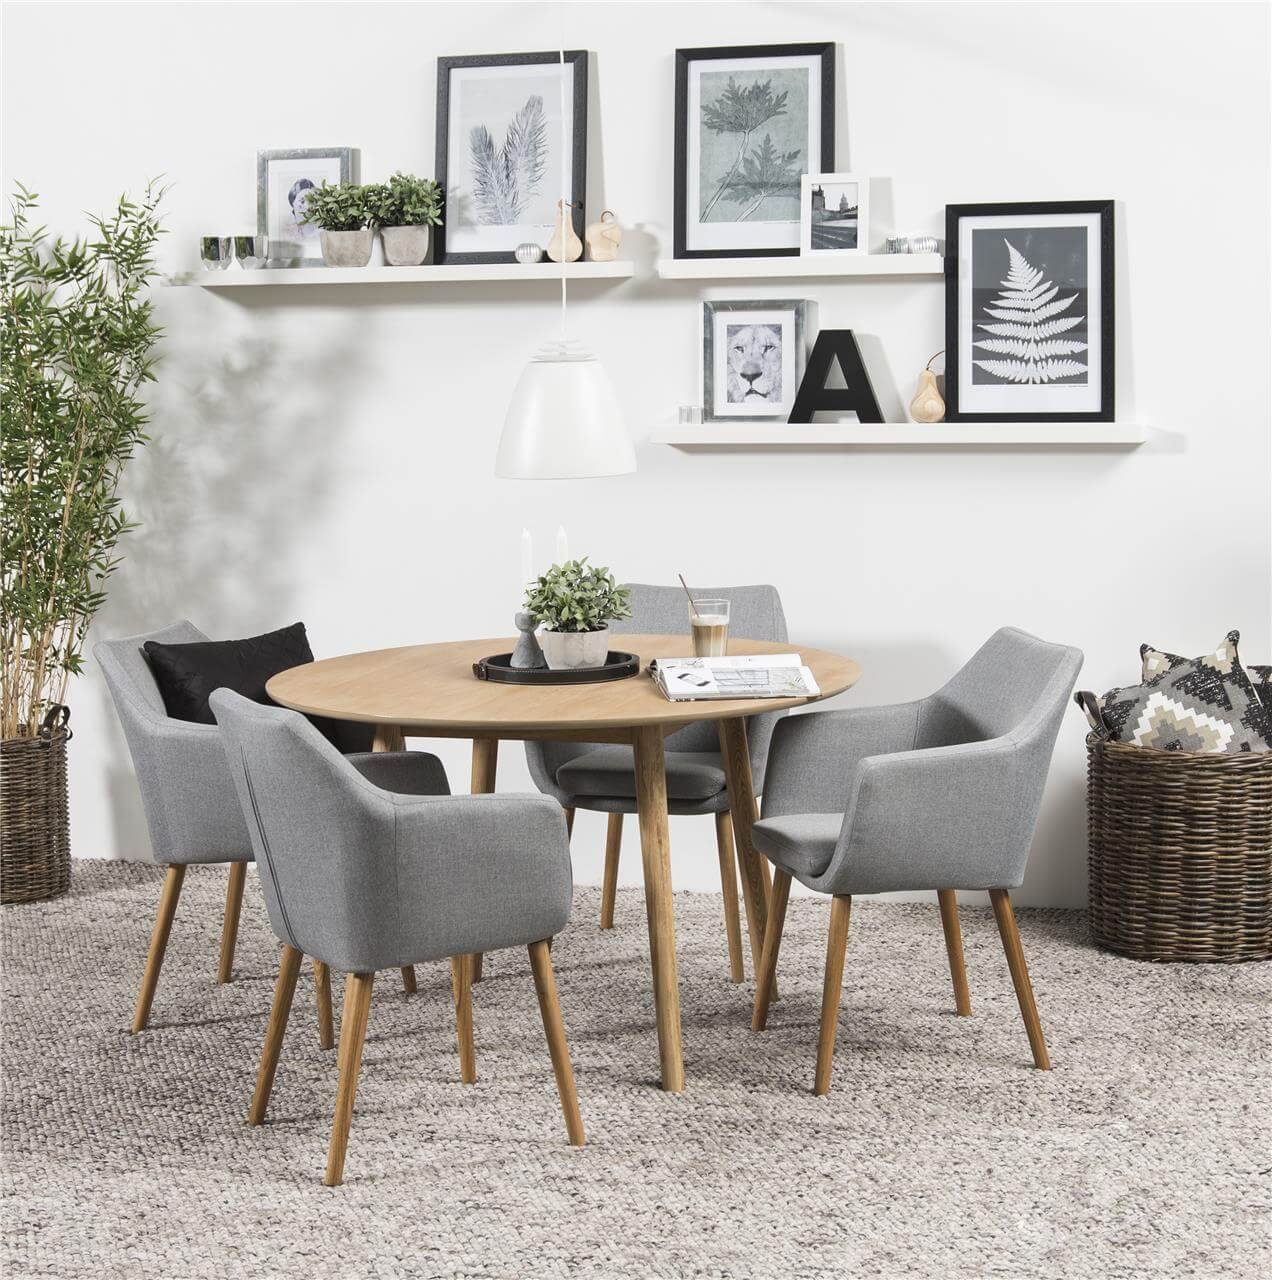 Nagano 4 Seater Round Oak Dining Table Dining Room Furniture FADS